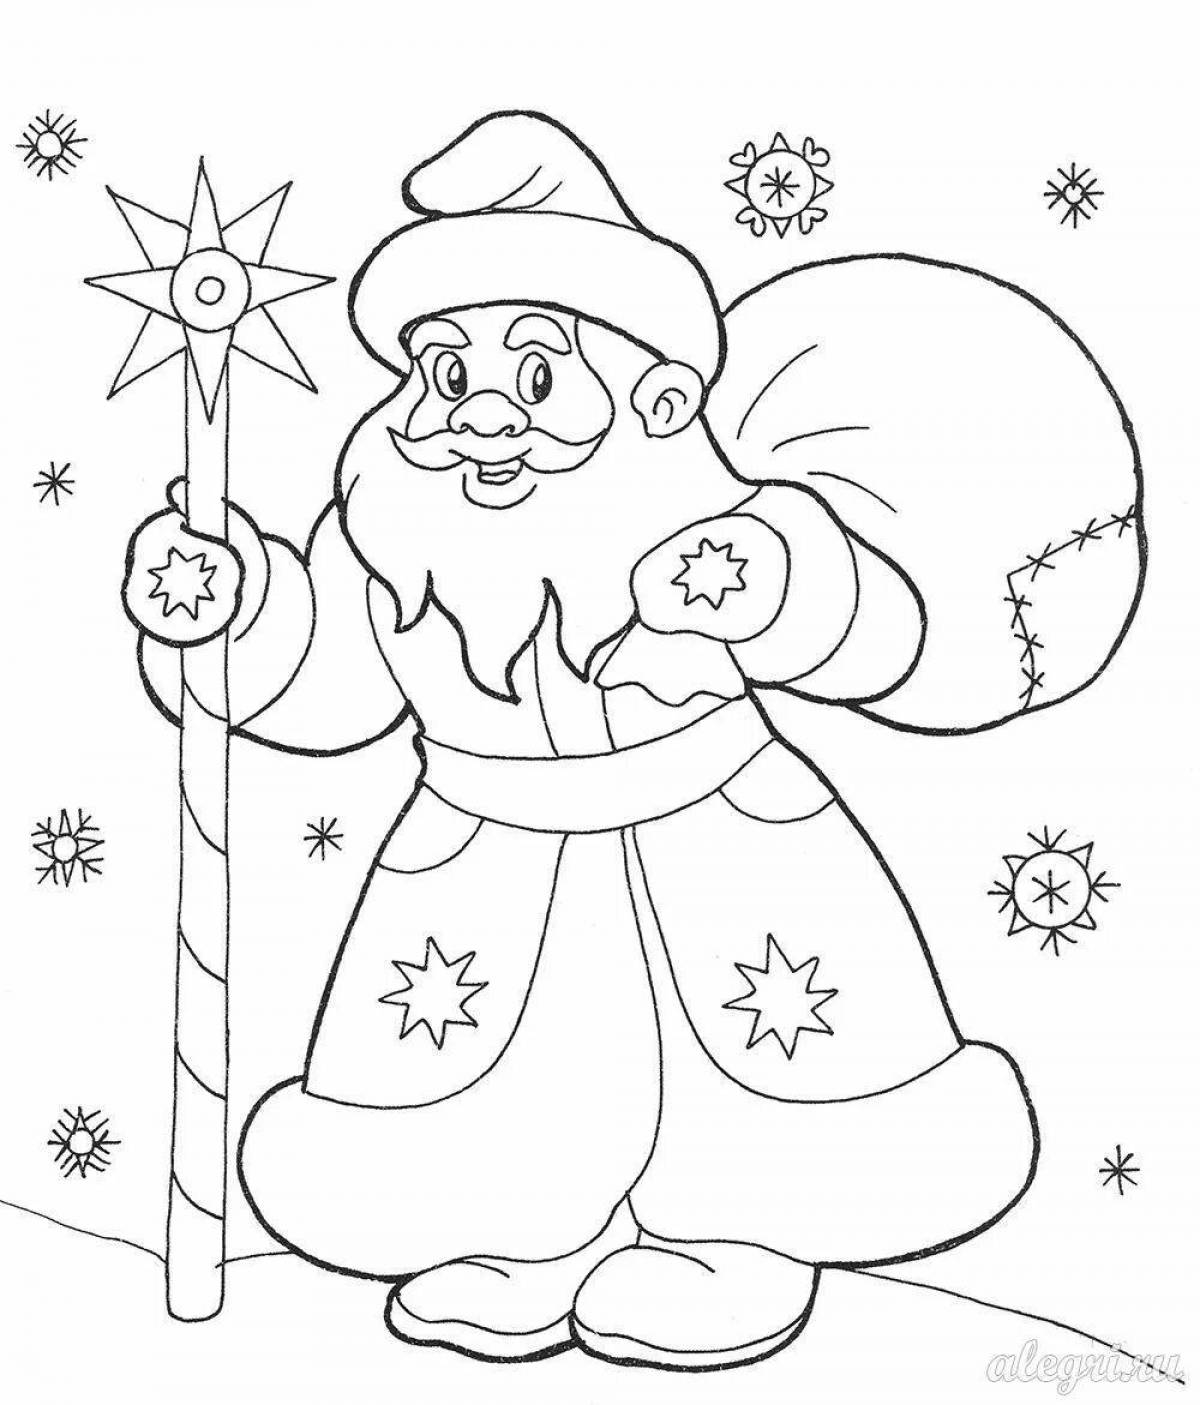 Amazing Christmas coloring book for kids